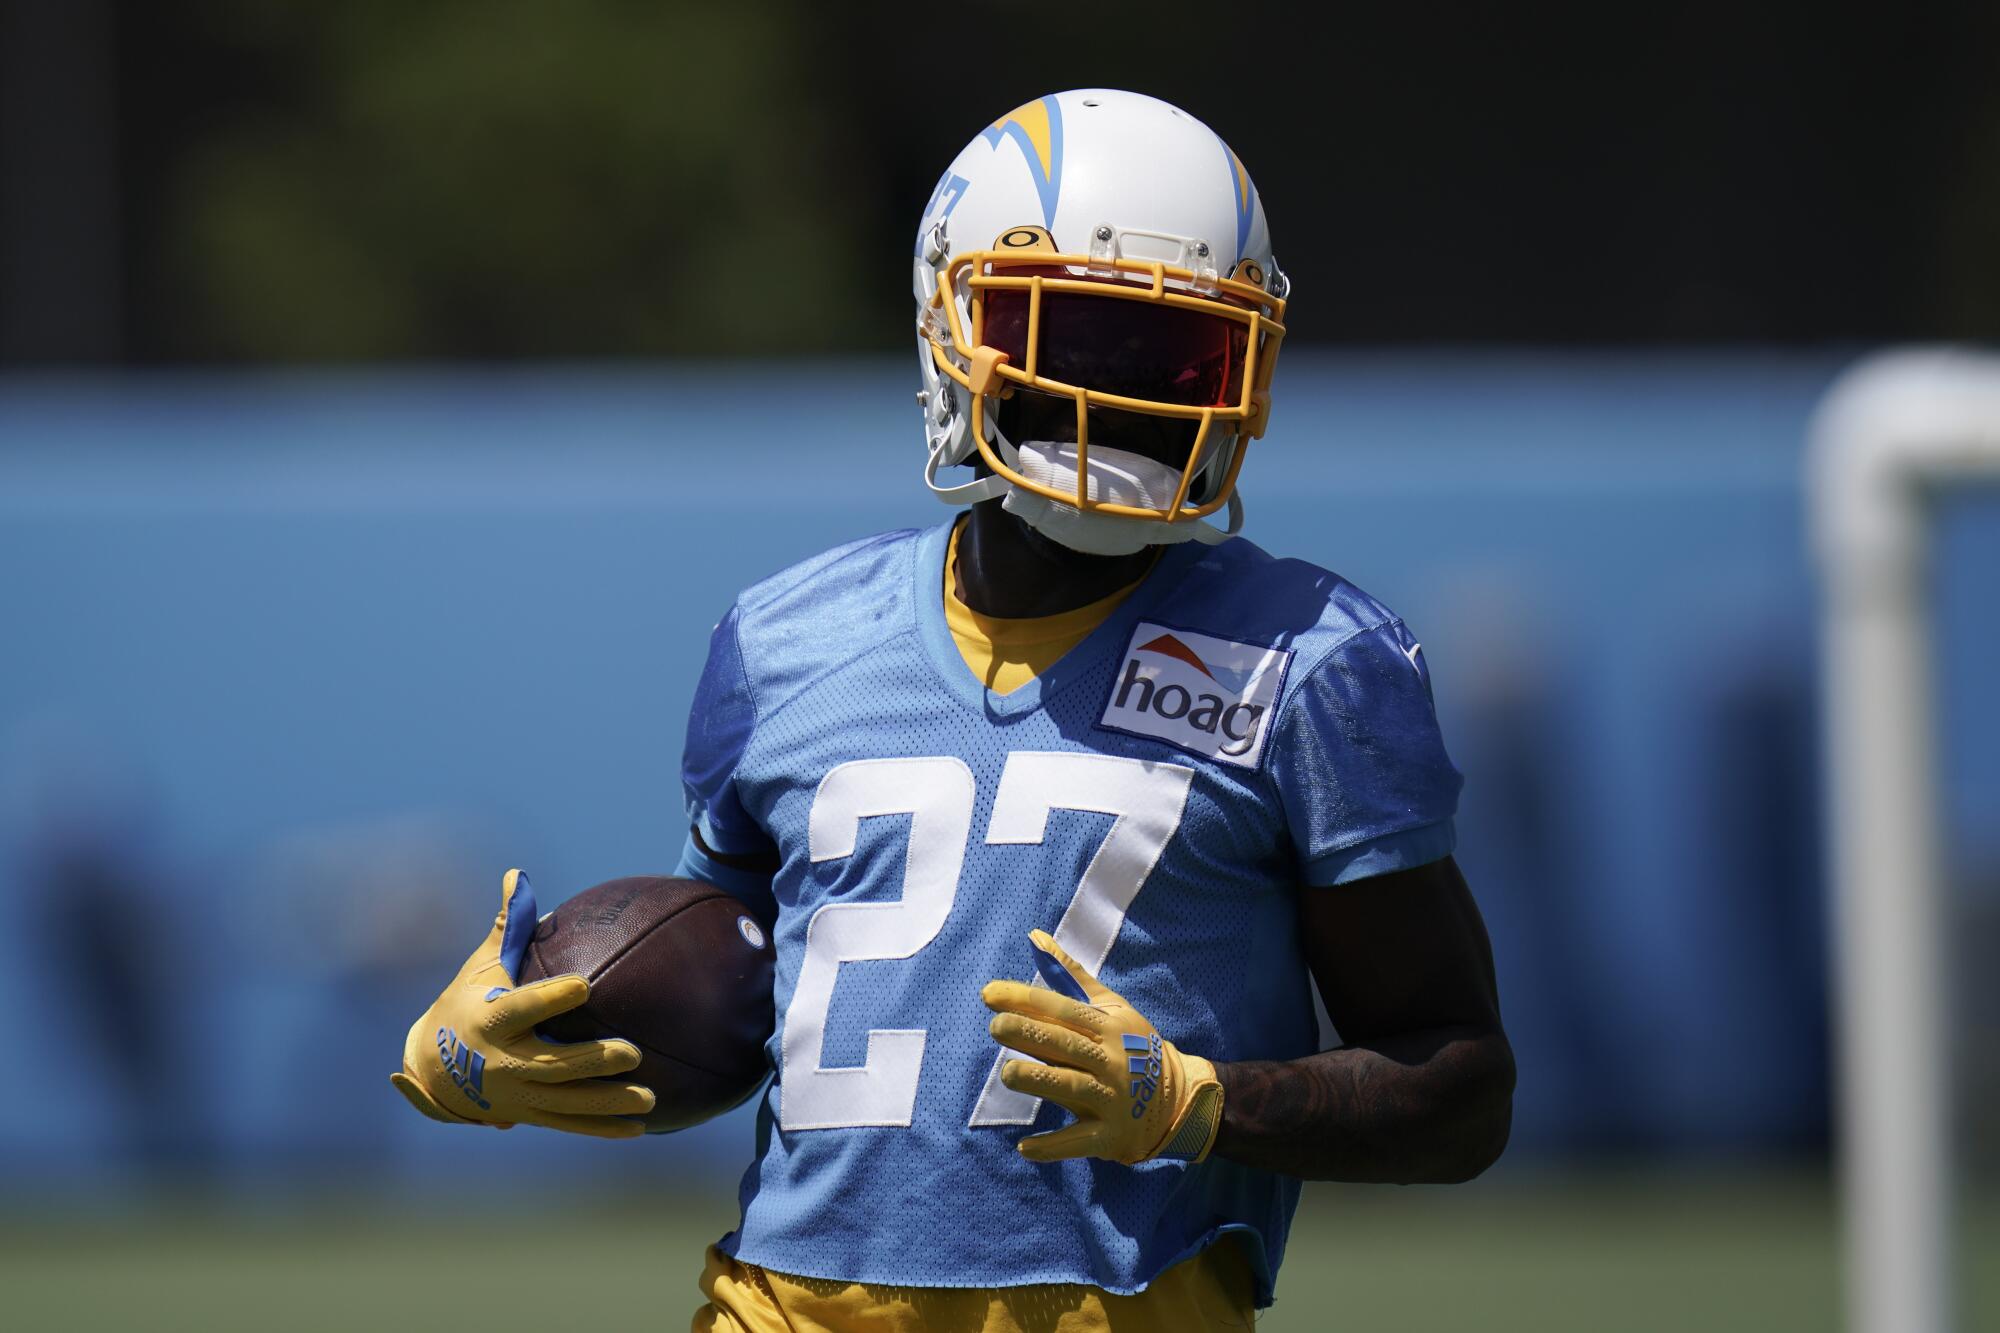 Chargers cornerback J.C. Jackson carries the ball at the NFL football team's practice facility.